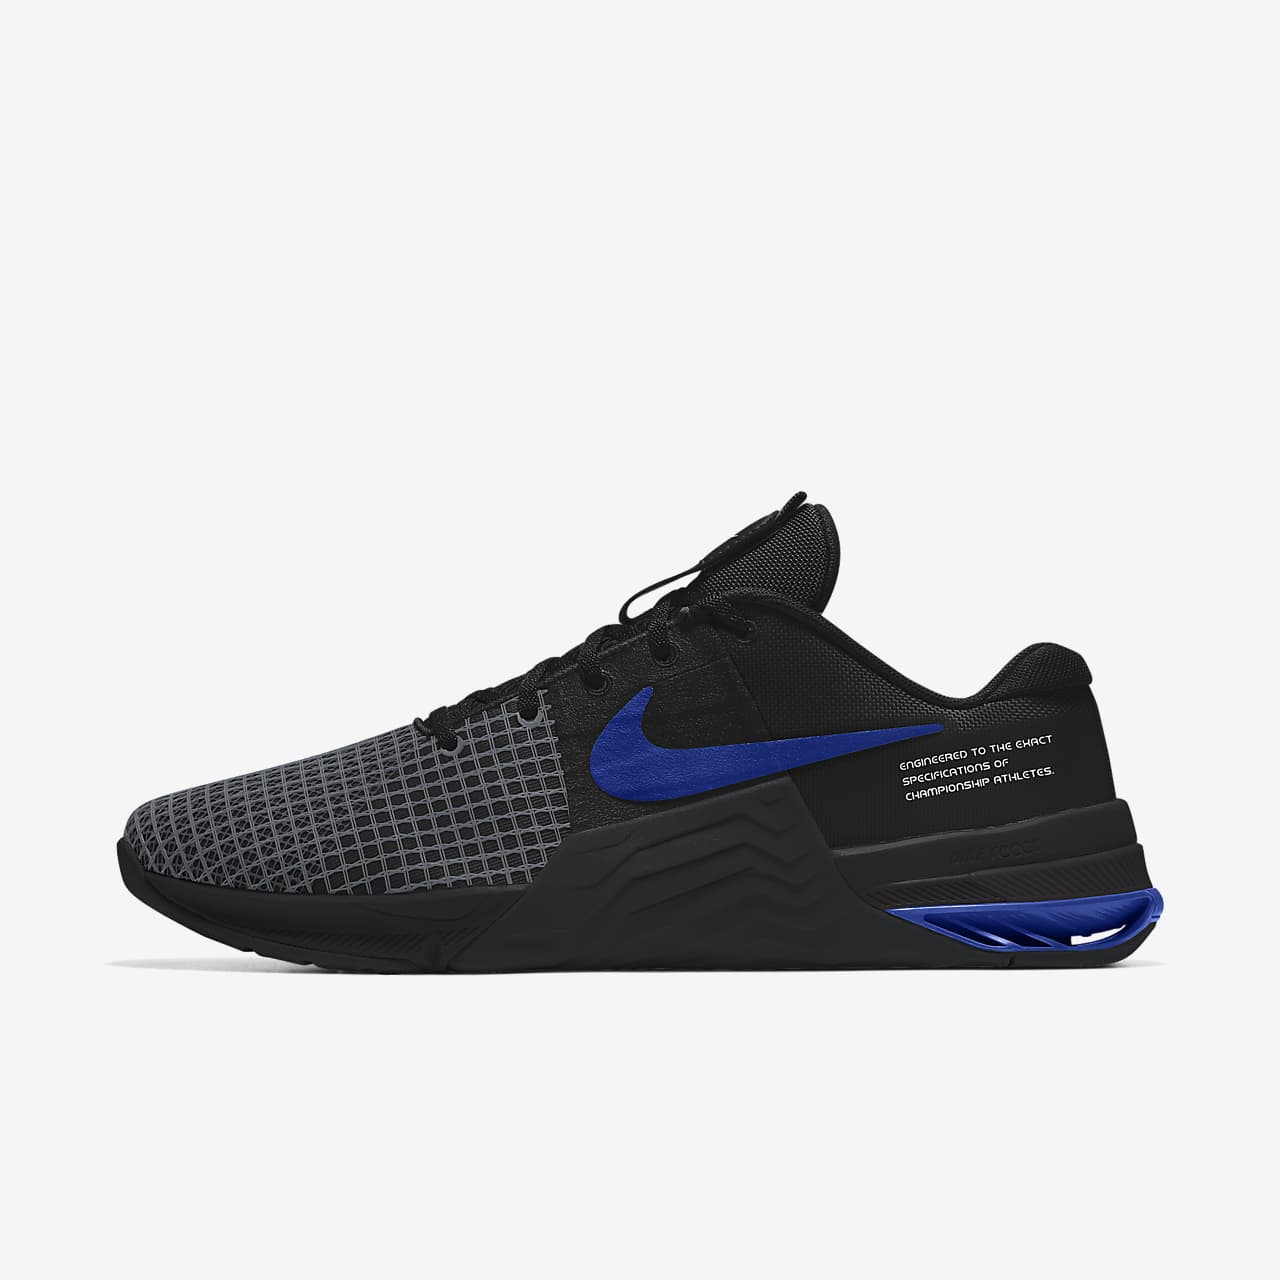 Chaussure de training personnalisable Nike Metcon 8 By You pour Homme